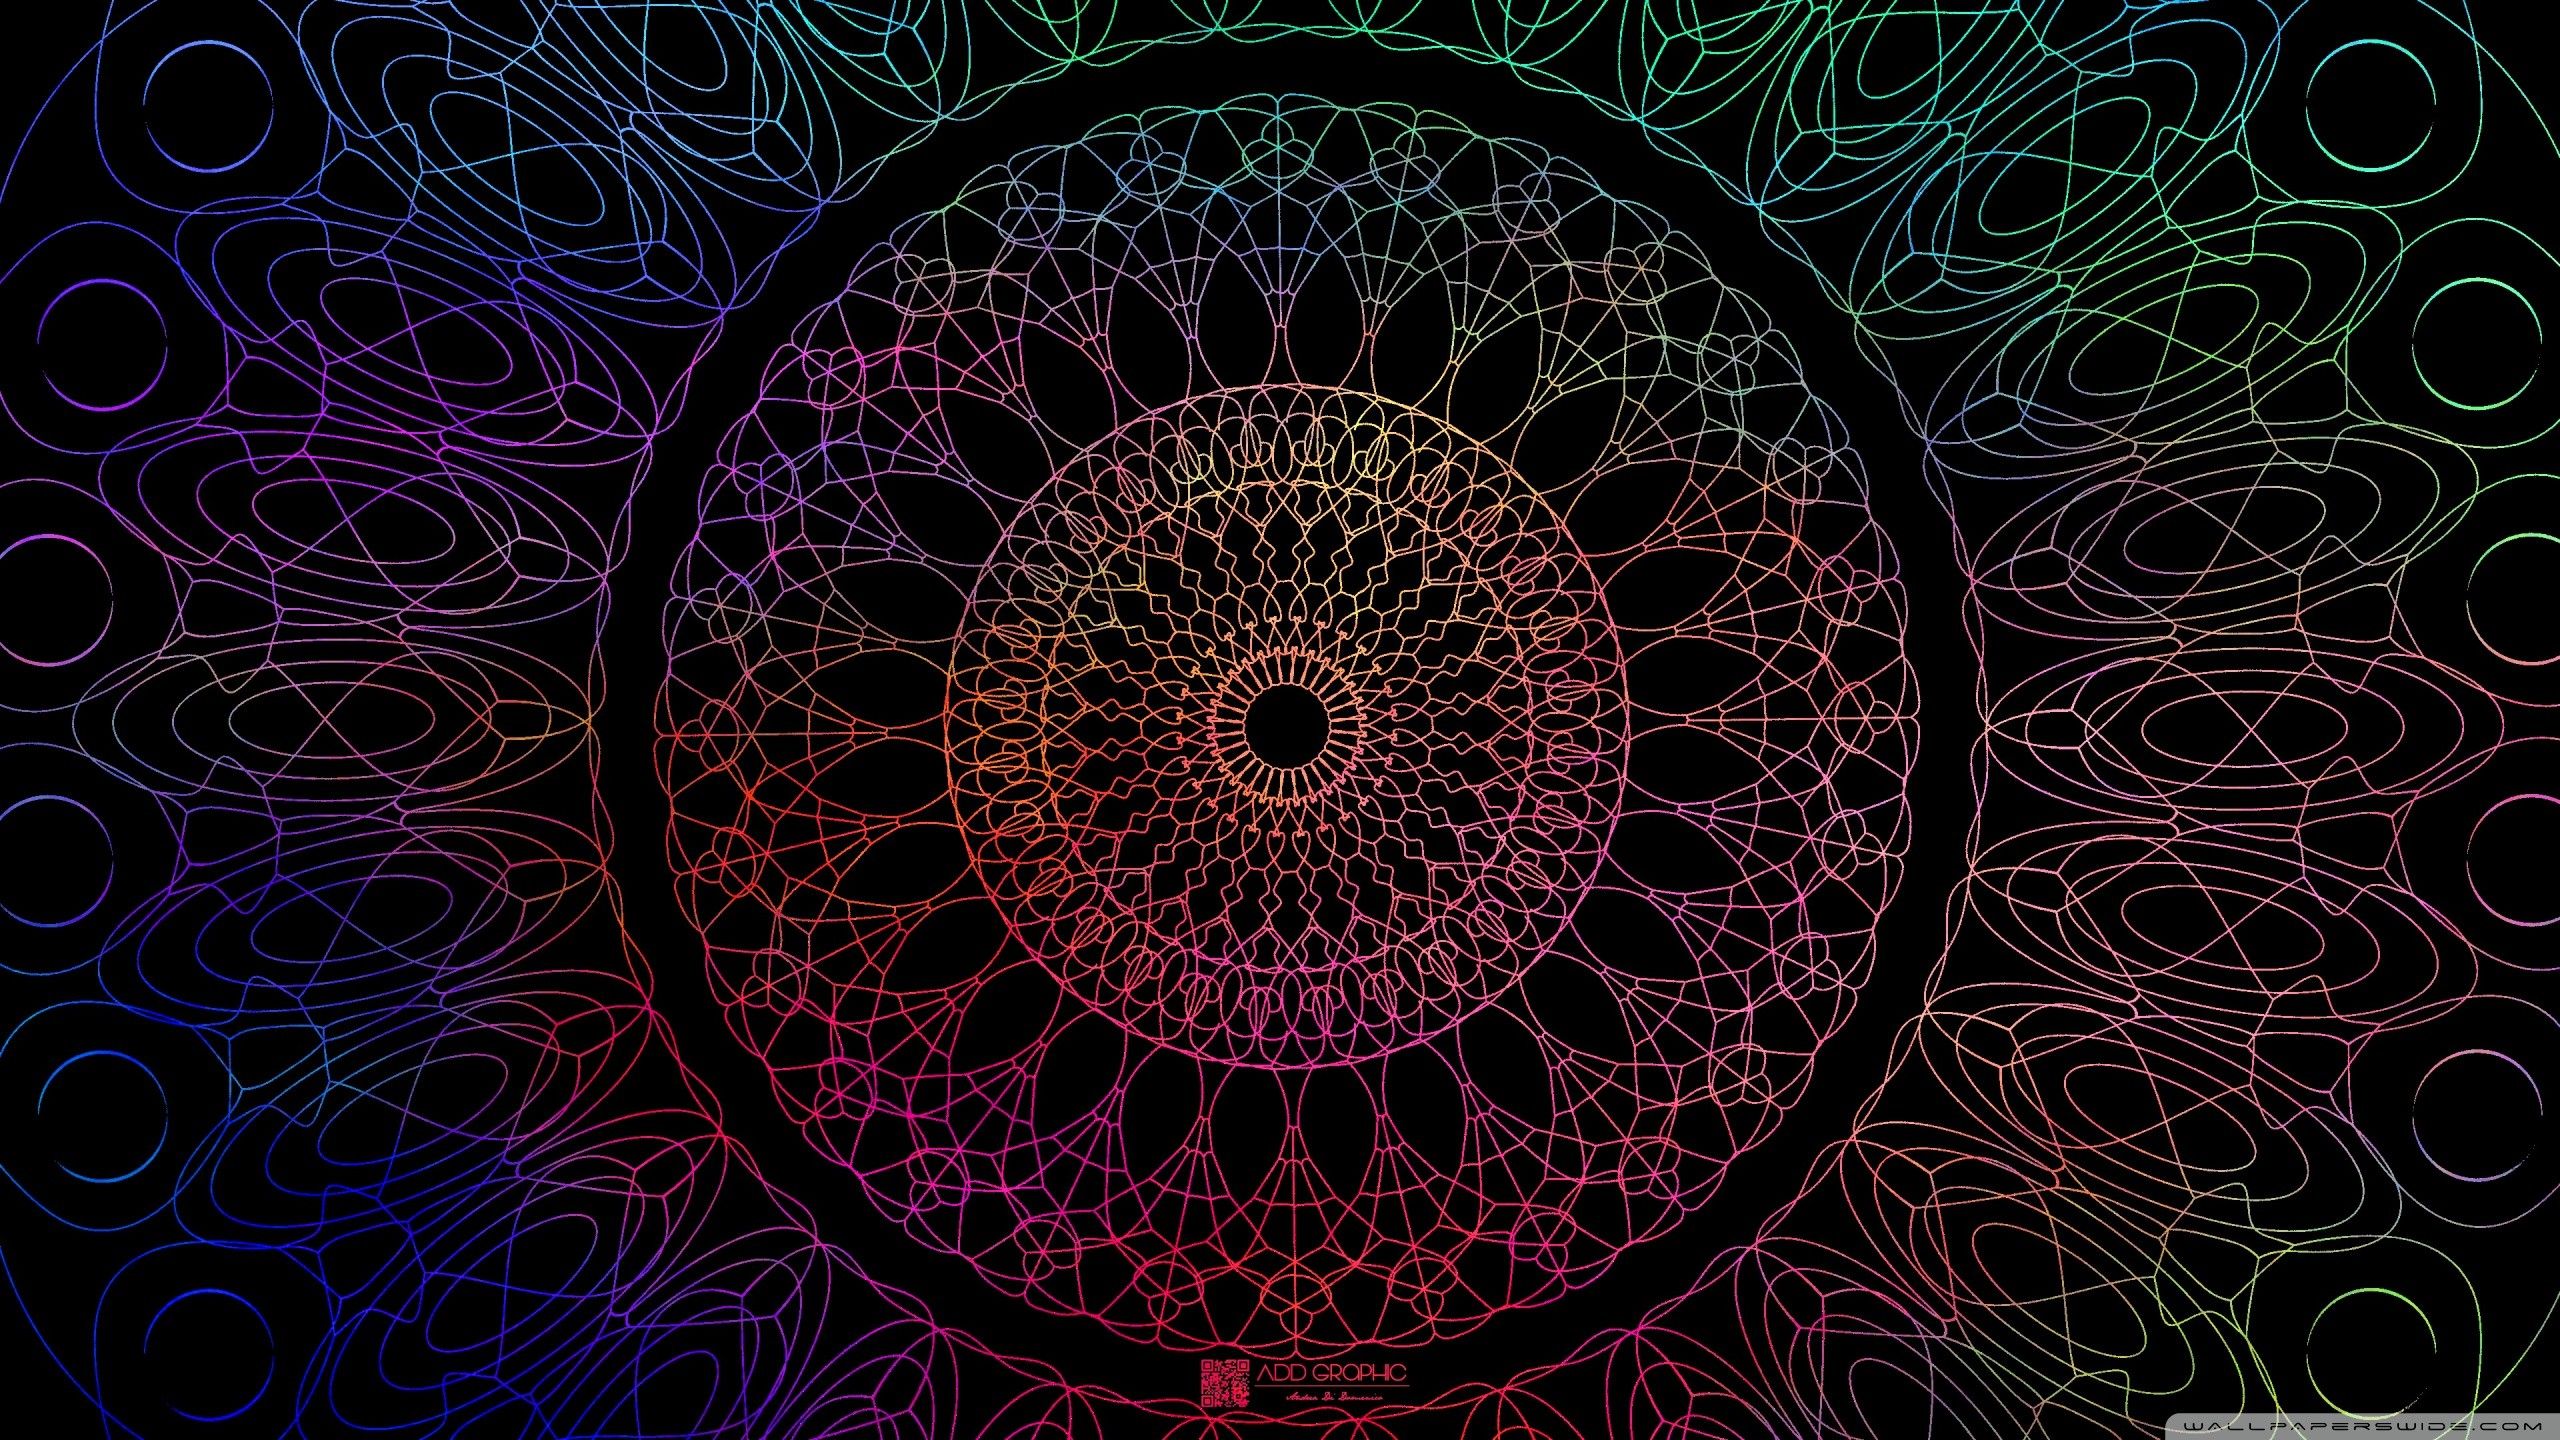 Download wallpaper 1350x2400 mandala, pattern, colorful, tangled,  abstraction iphone 8+/7+/6s+/6+ for parallax hd background